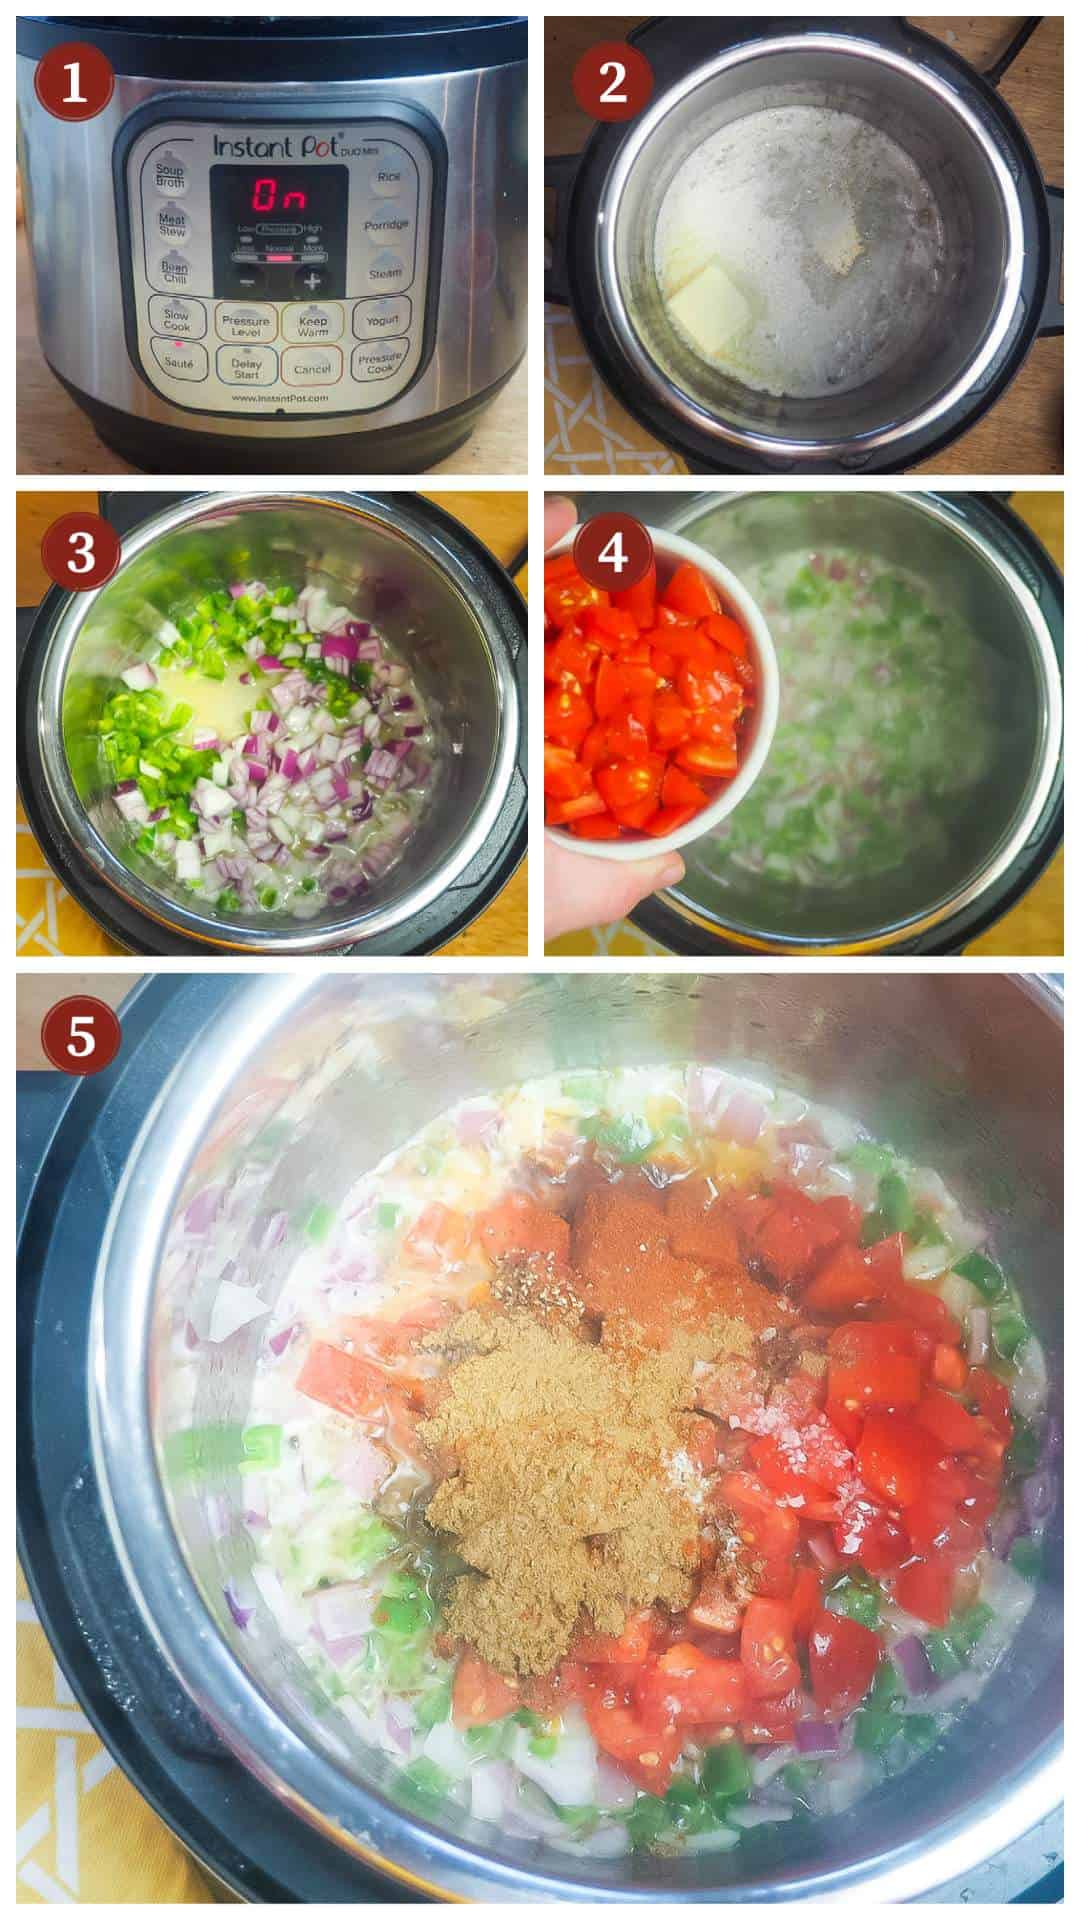 A collage of images showing the process of making queso in an Instant Pot, steps 1 - 5.